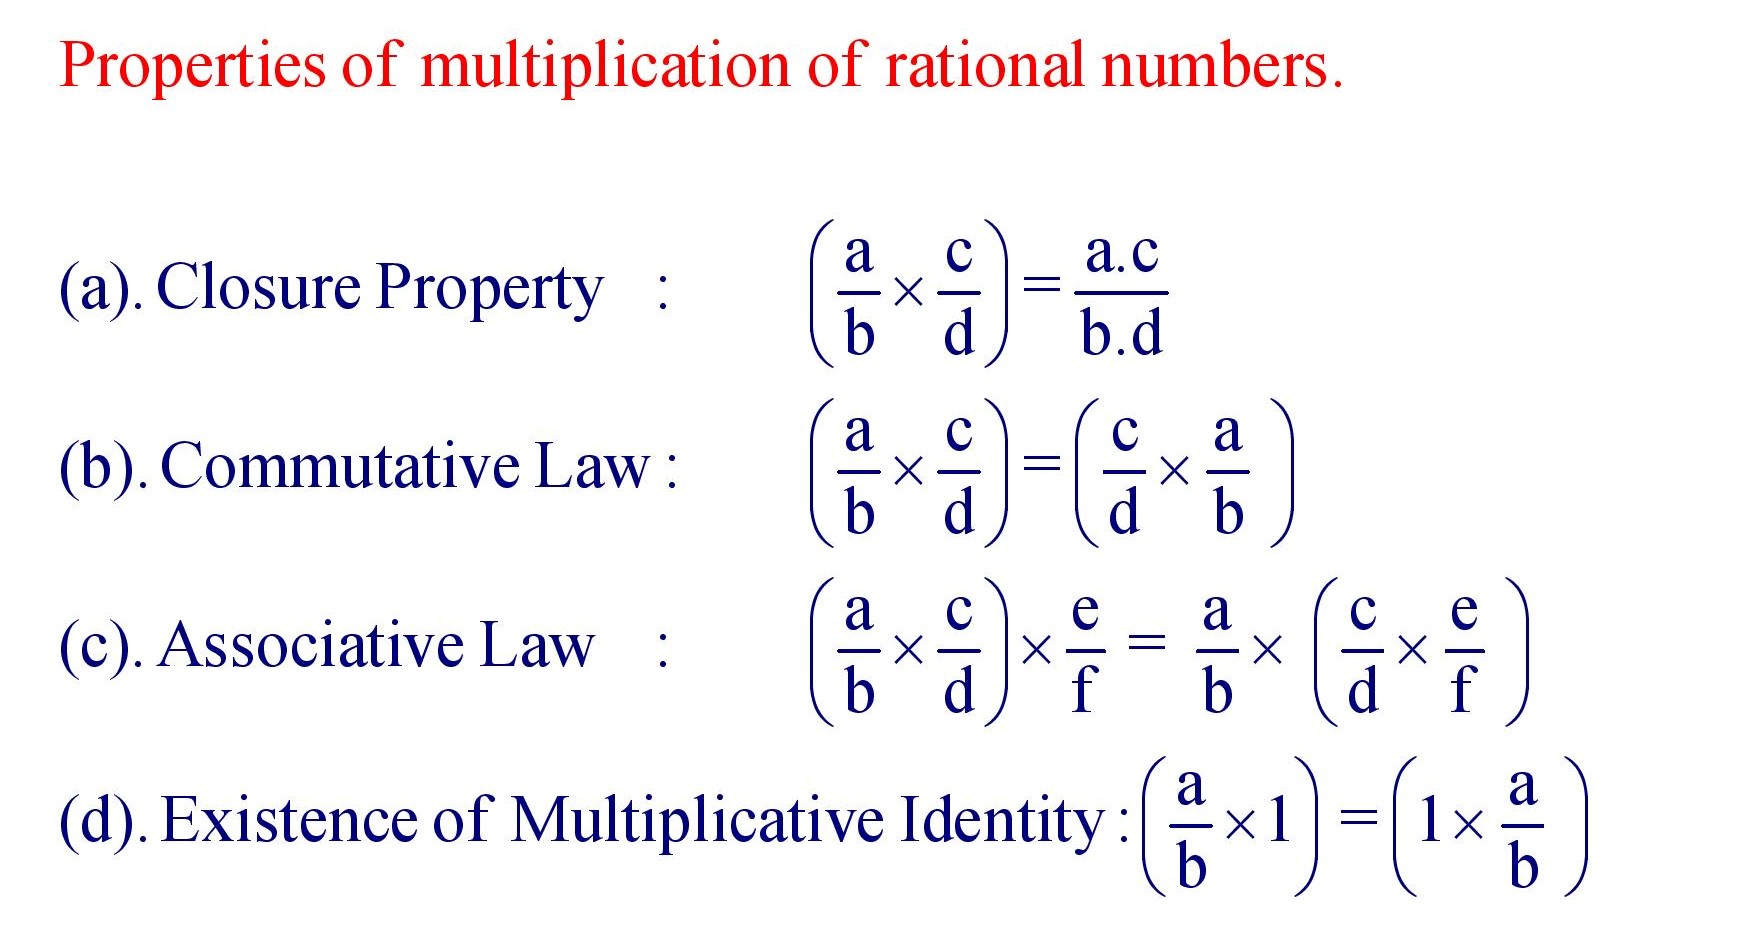 Properties of Multiplication of Rational Number